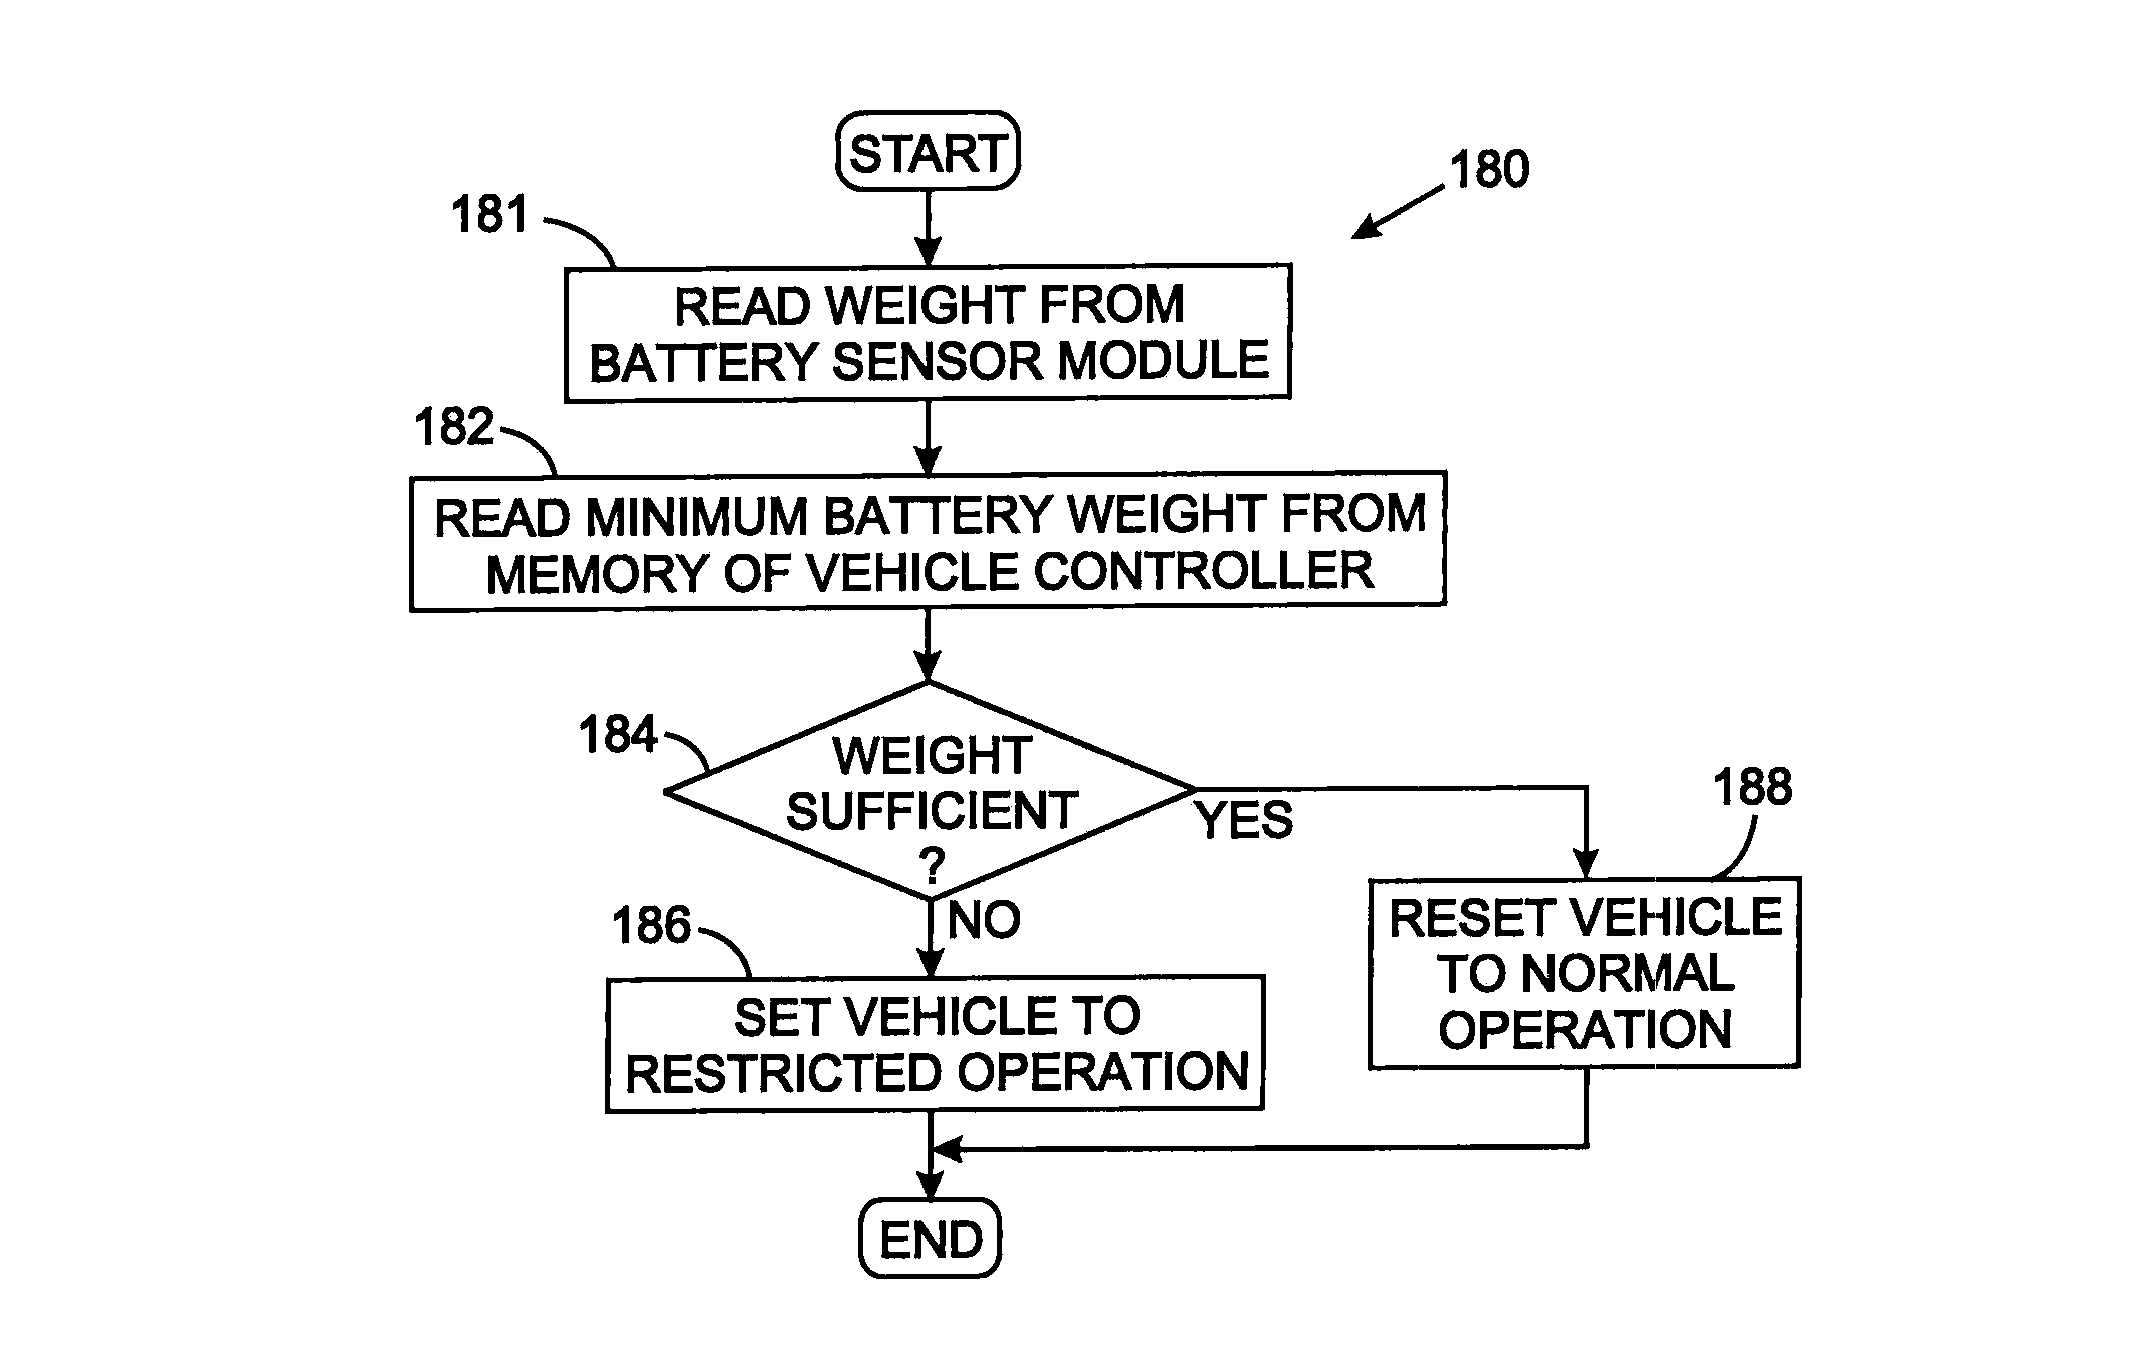 Controlling operation of an industrial vehicle based on battery weight